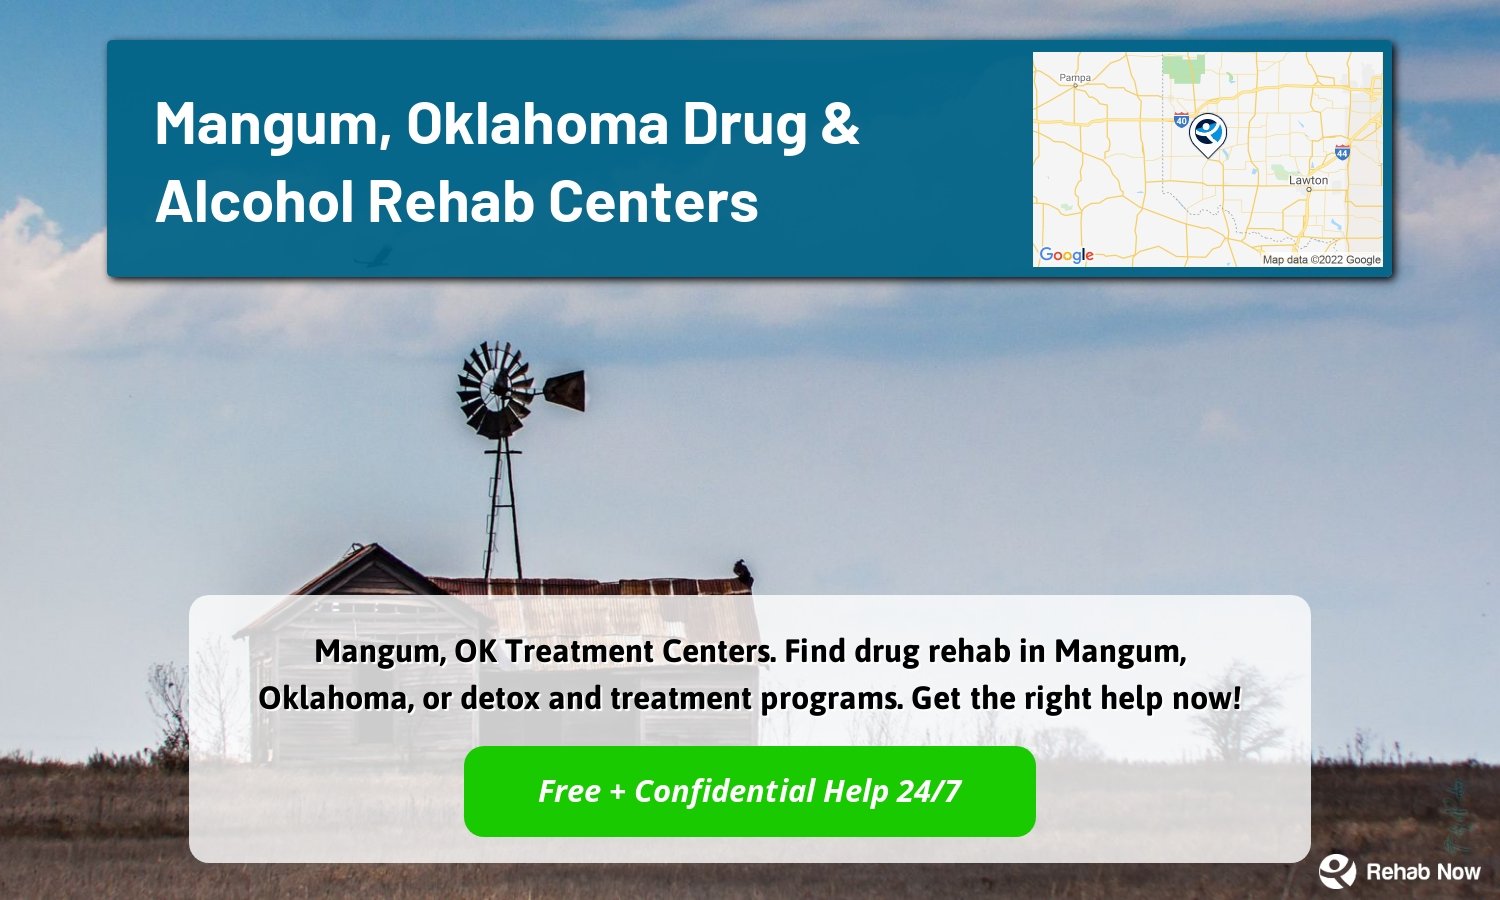 Mangum, OK Treatment Centers. Find drug rehab in Mangum, Oklahoma, or detox and treatment programs. Get the right help now!